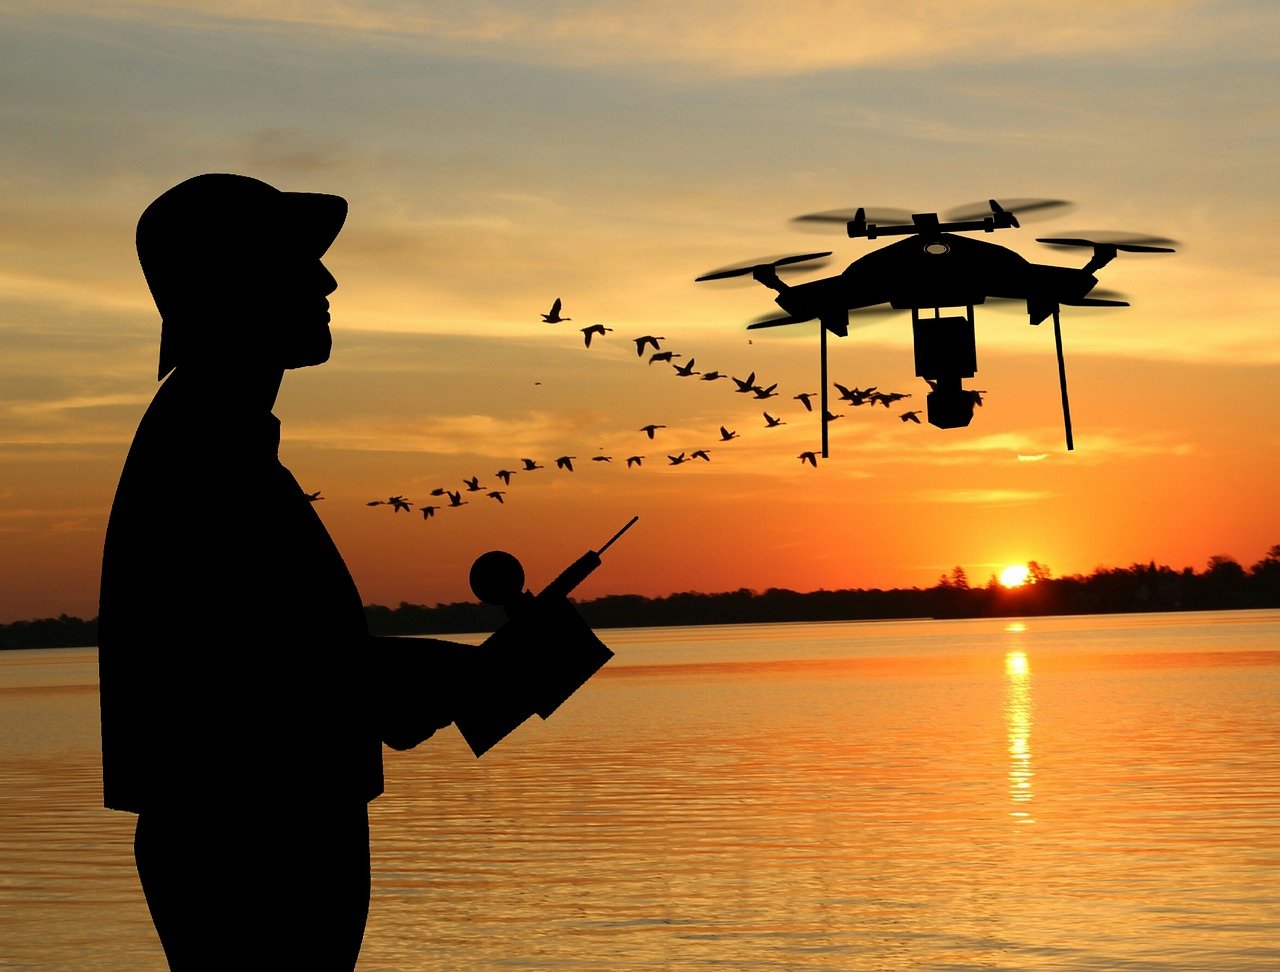 A man flying a drone